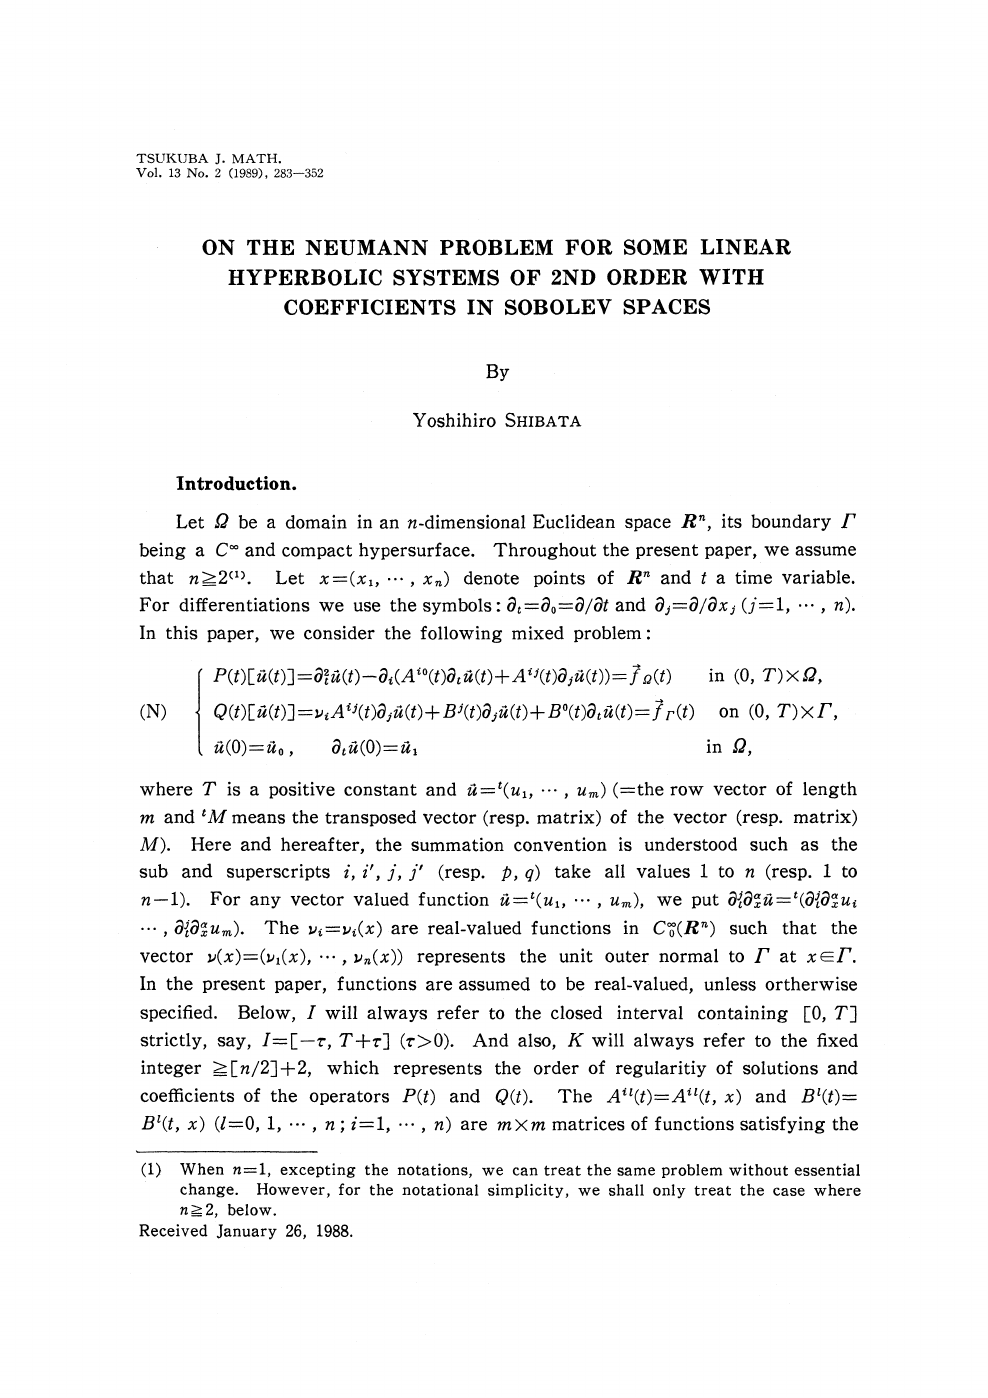 On The Neumann Problem For Some Linear Hyperbolic Systems Of 2nd Order With Coeffcients In Sobolev Spaces Topic Of Research Paper In Mathematics Download Scholarly Article Pdf And Read For Free